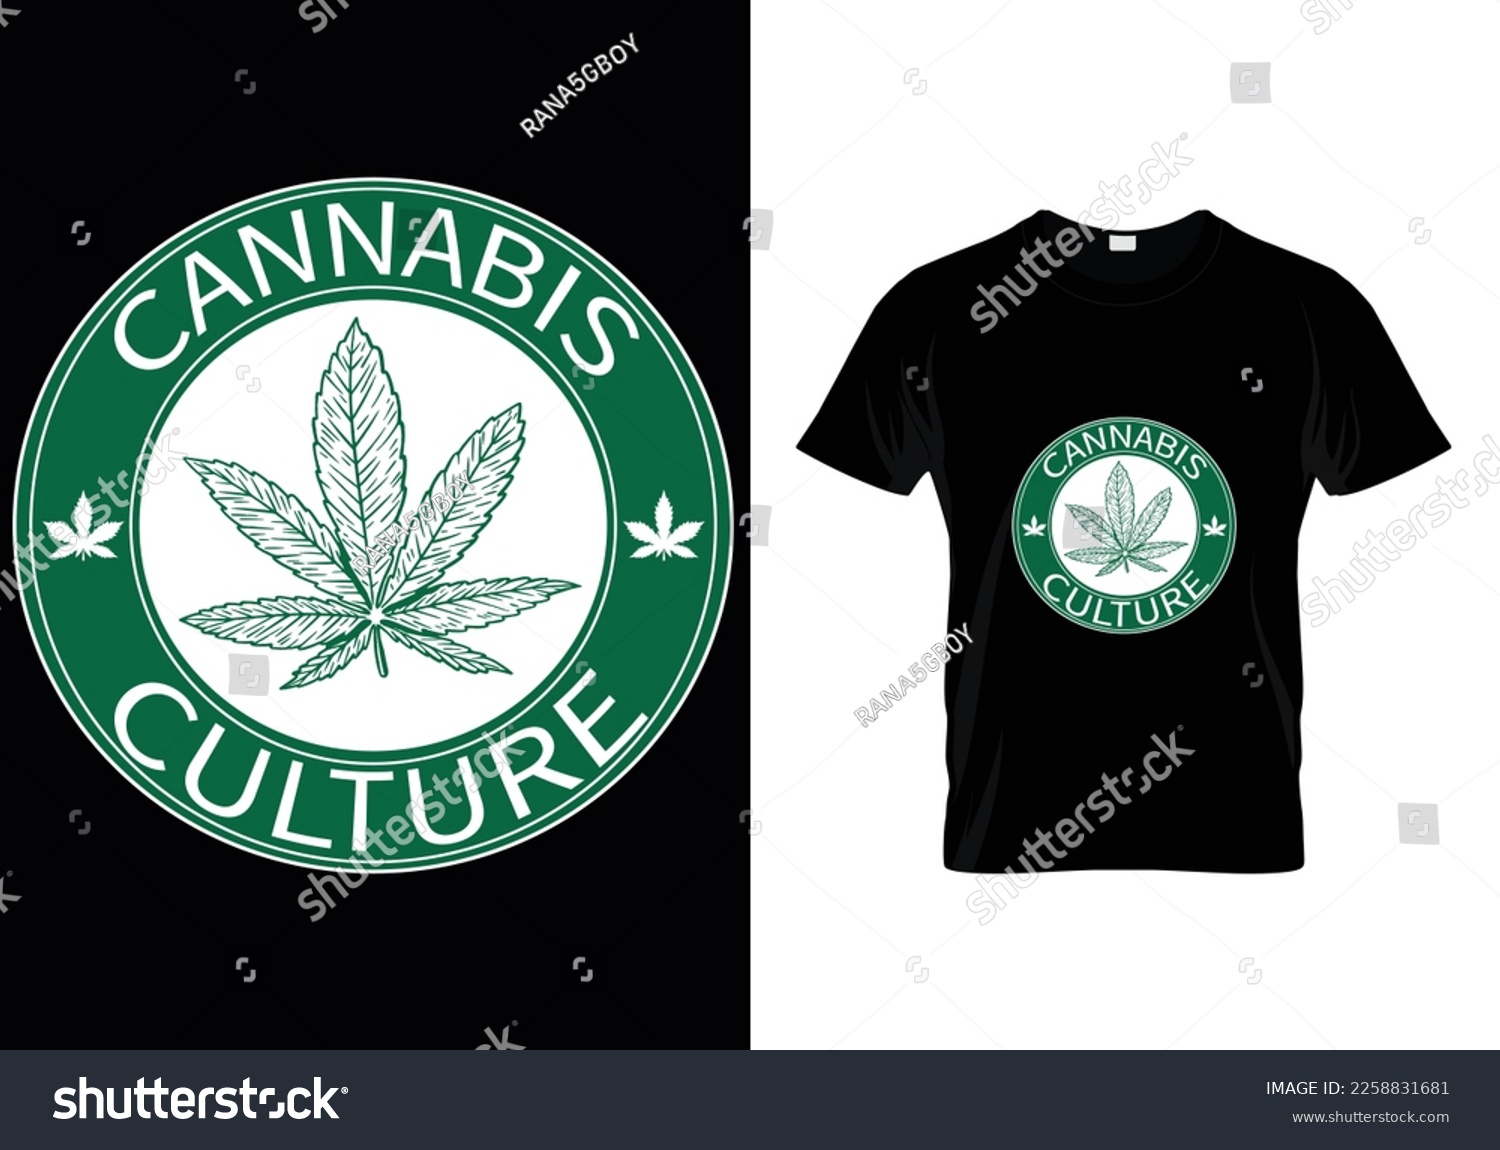 SVG of Cannabis Culture Weed T-Shirt Design svg